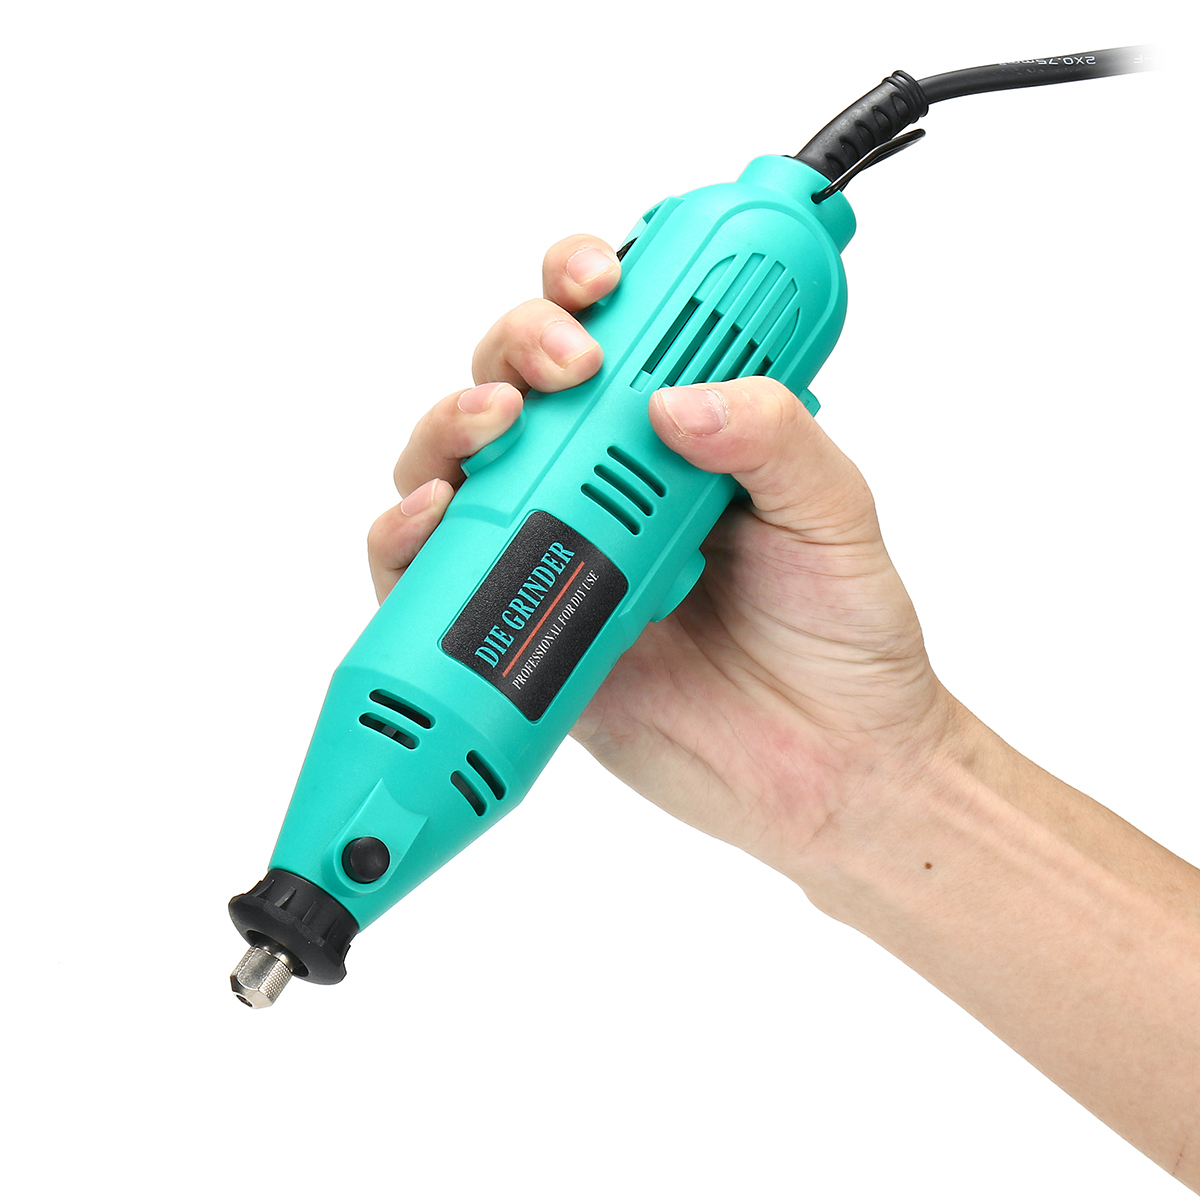 130W-Electric-Grinder-Drill-Engraver-Rotary-Tool-Variable-Speed-Rotary-Carving-Polishing-Machine-110-1905899-18